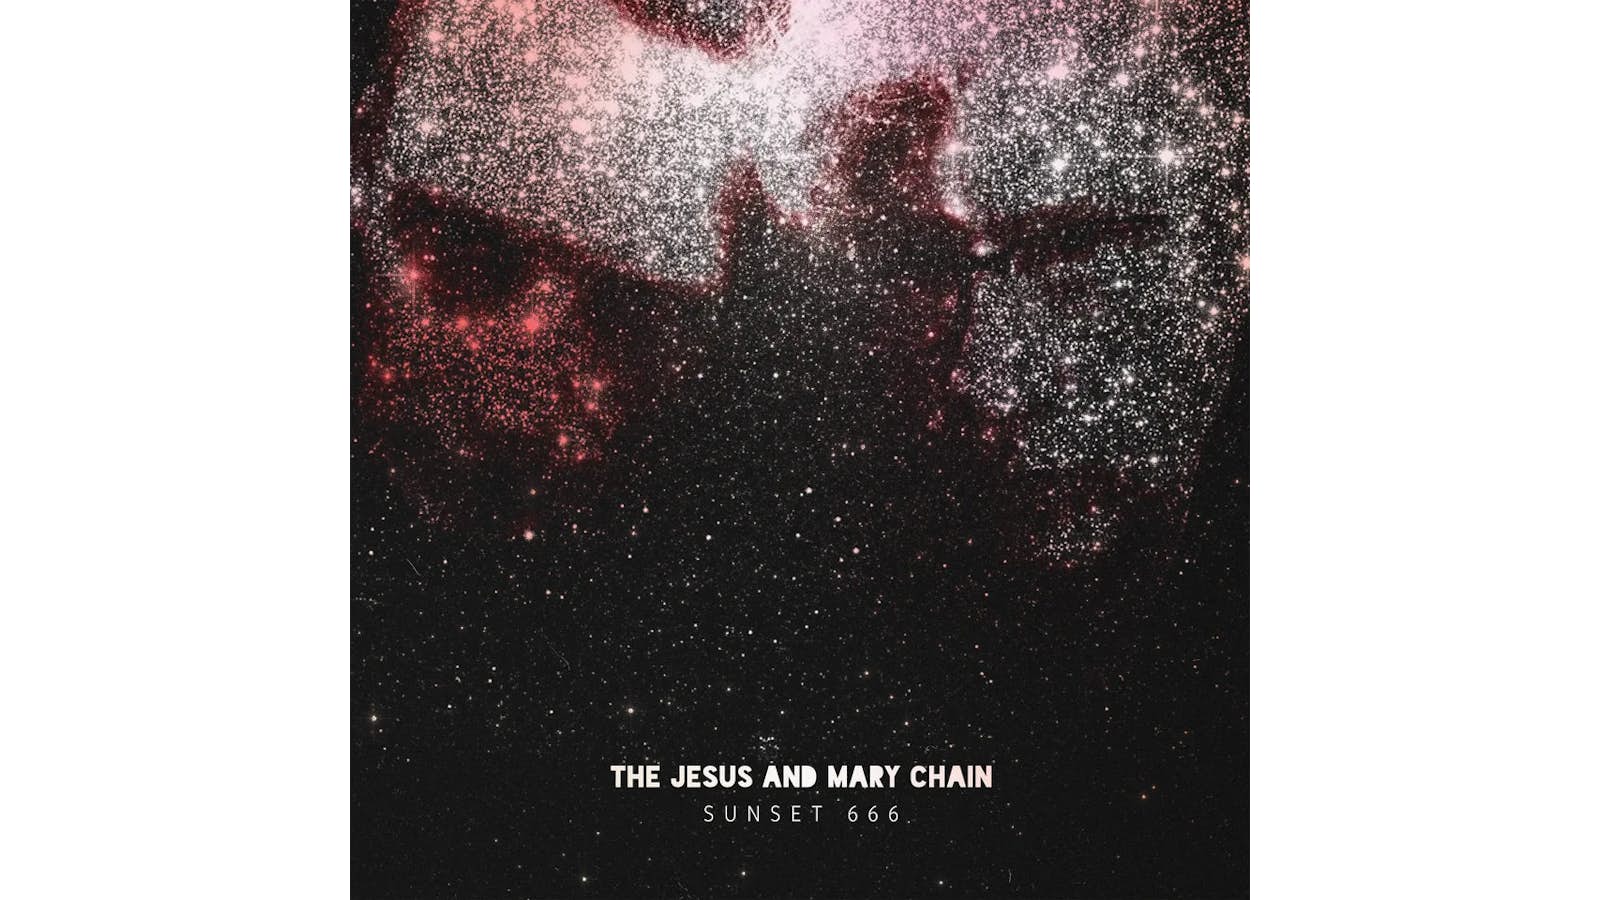 The Jesus and Mary Chain GLASGOW EYES Vinyl Record